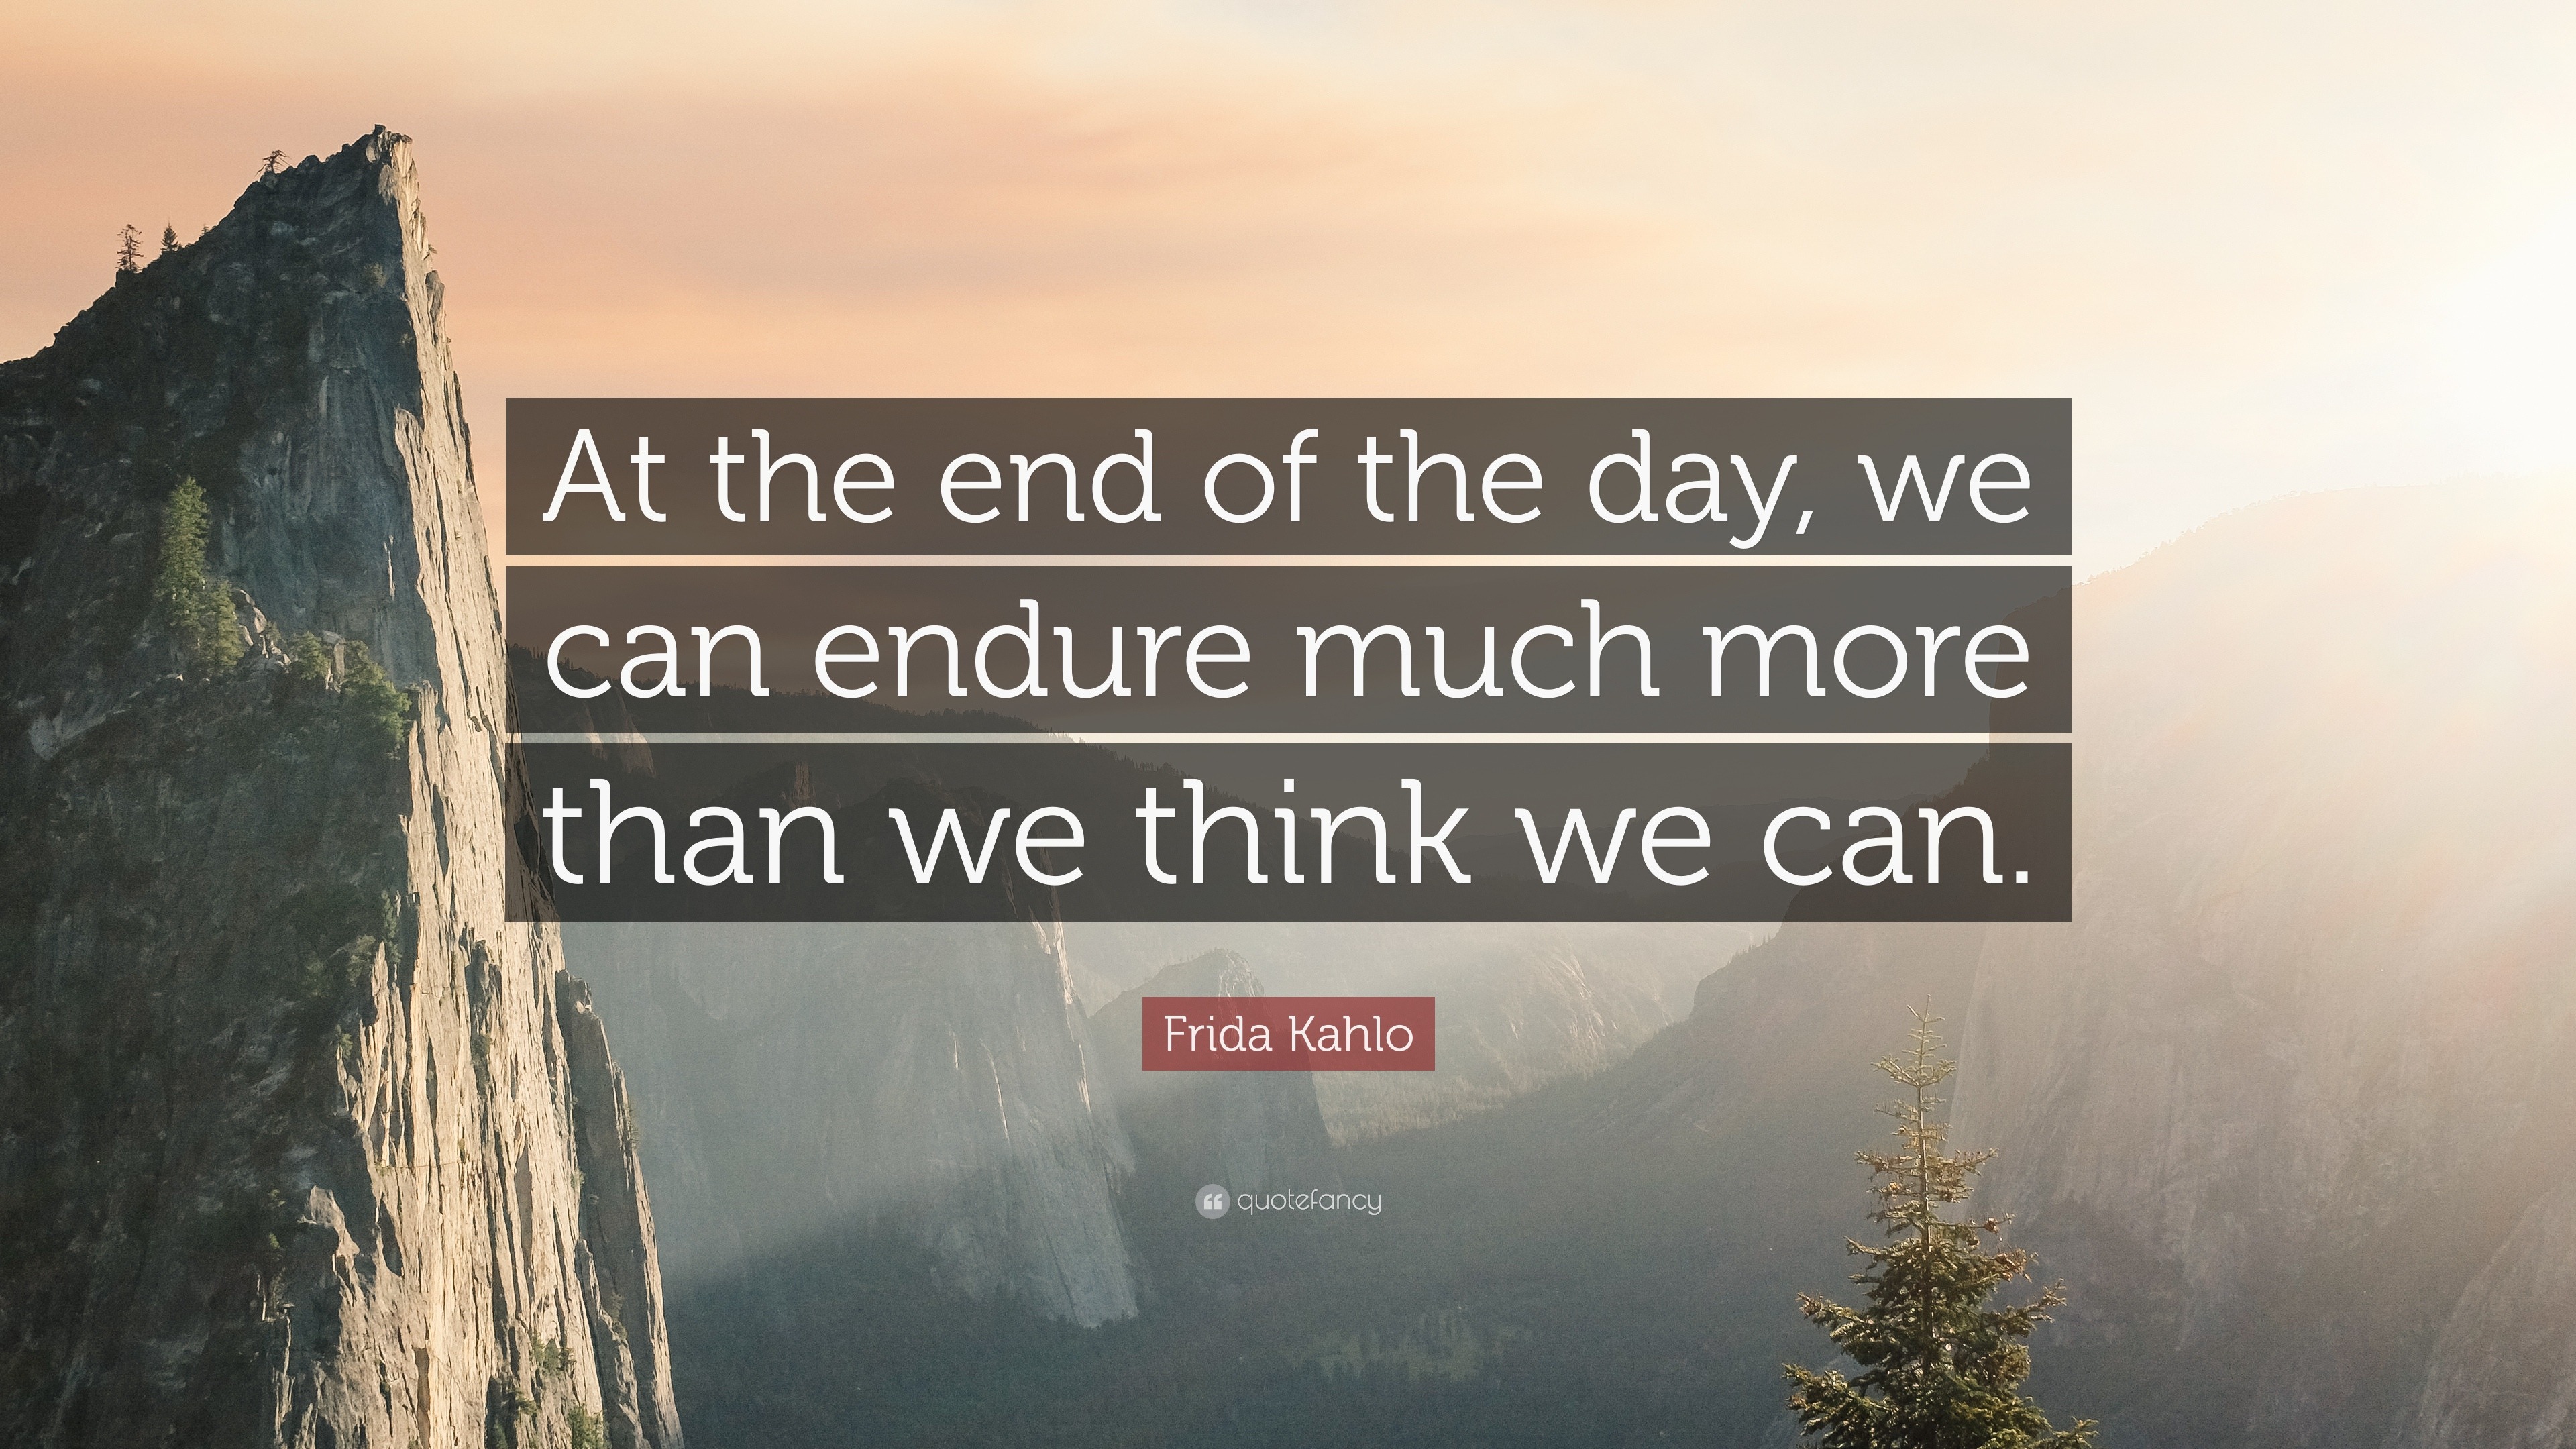 Frida Kahlo Quote: “At the end of the day, we can endure much more than ...